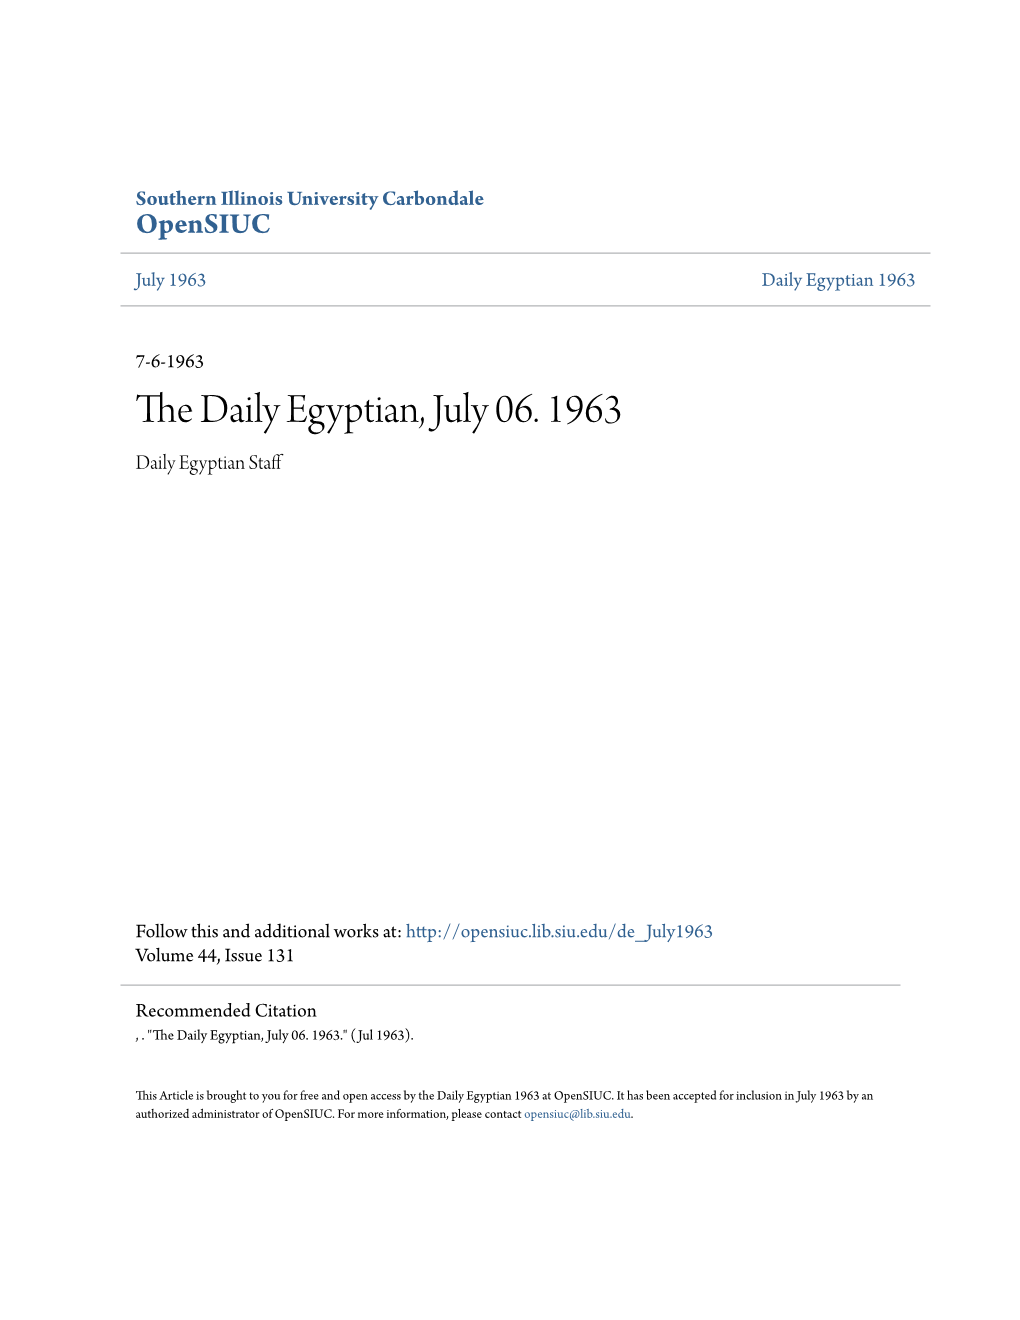 The Daily Egyptian, July 06. 1963